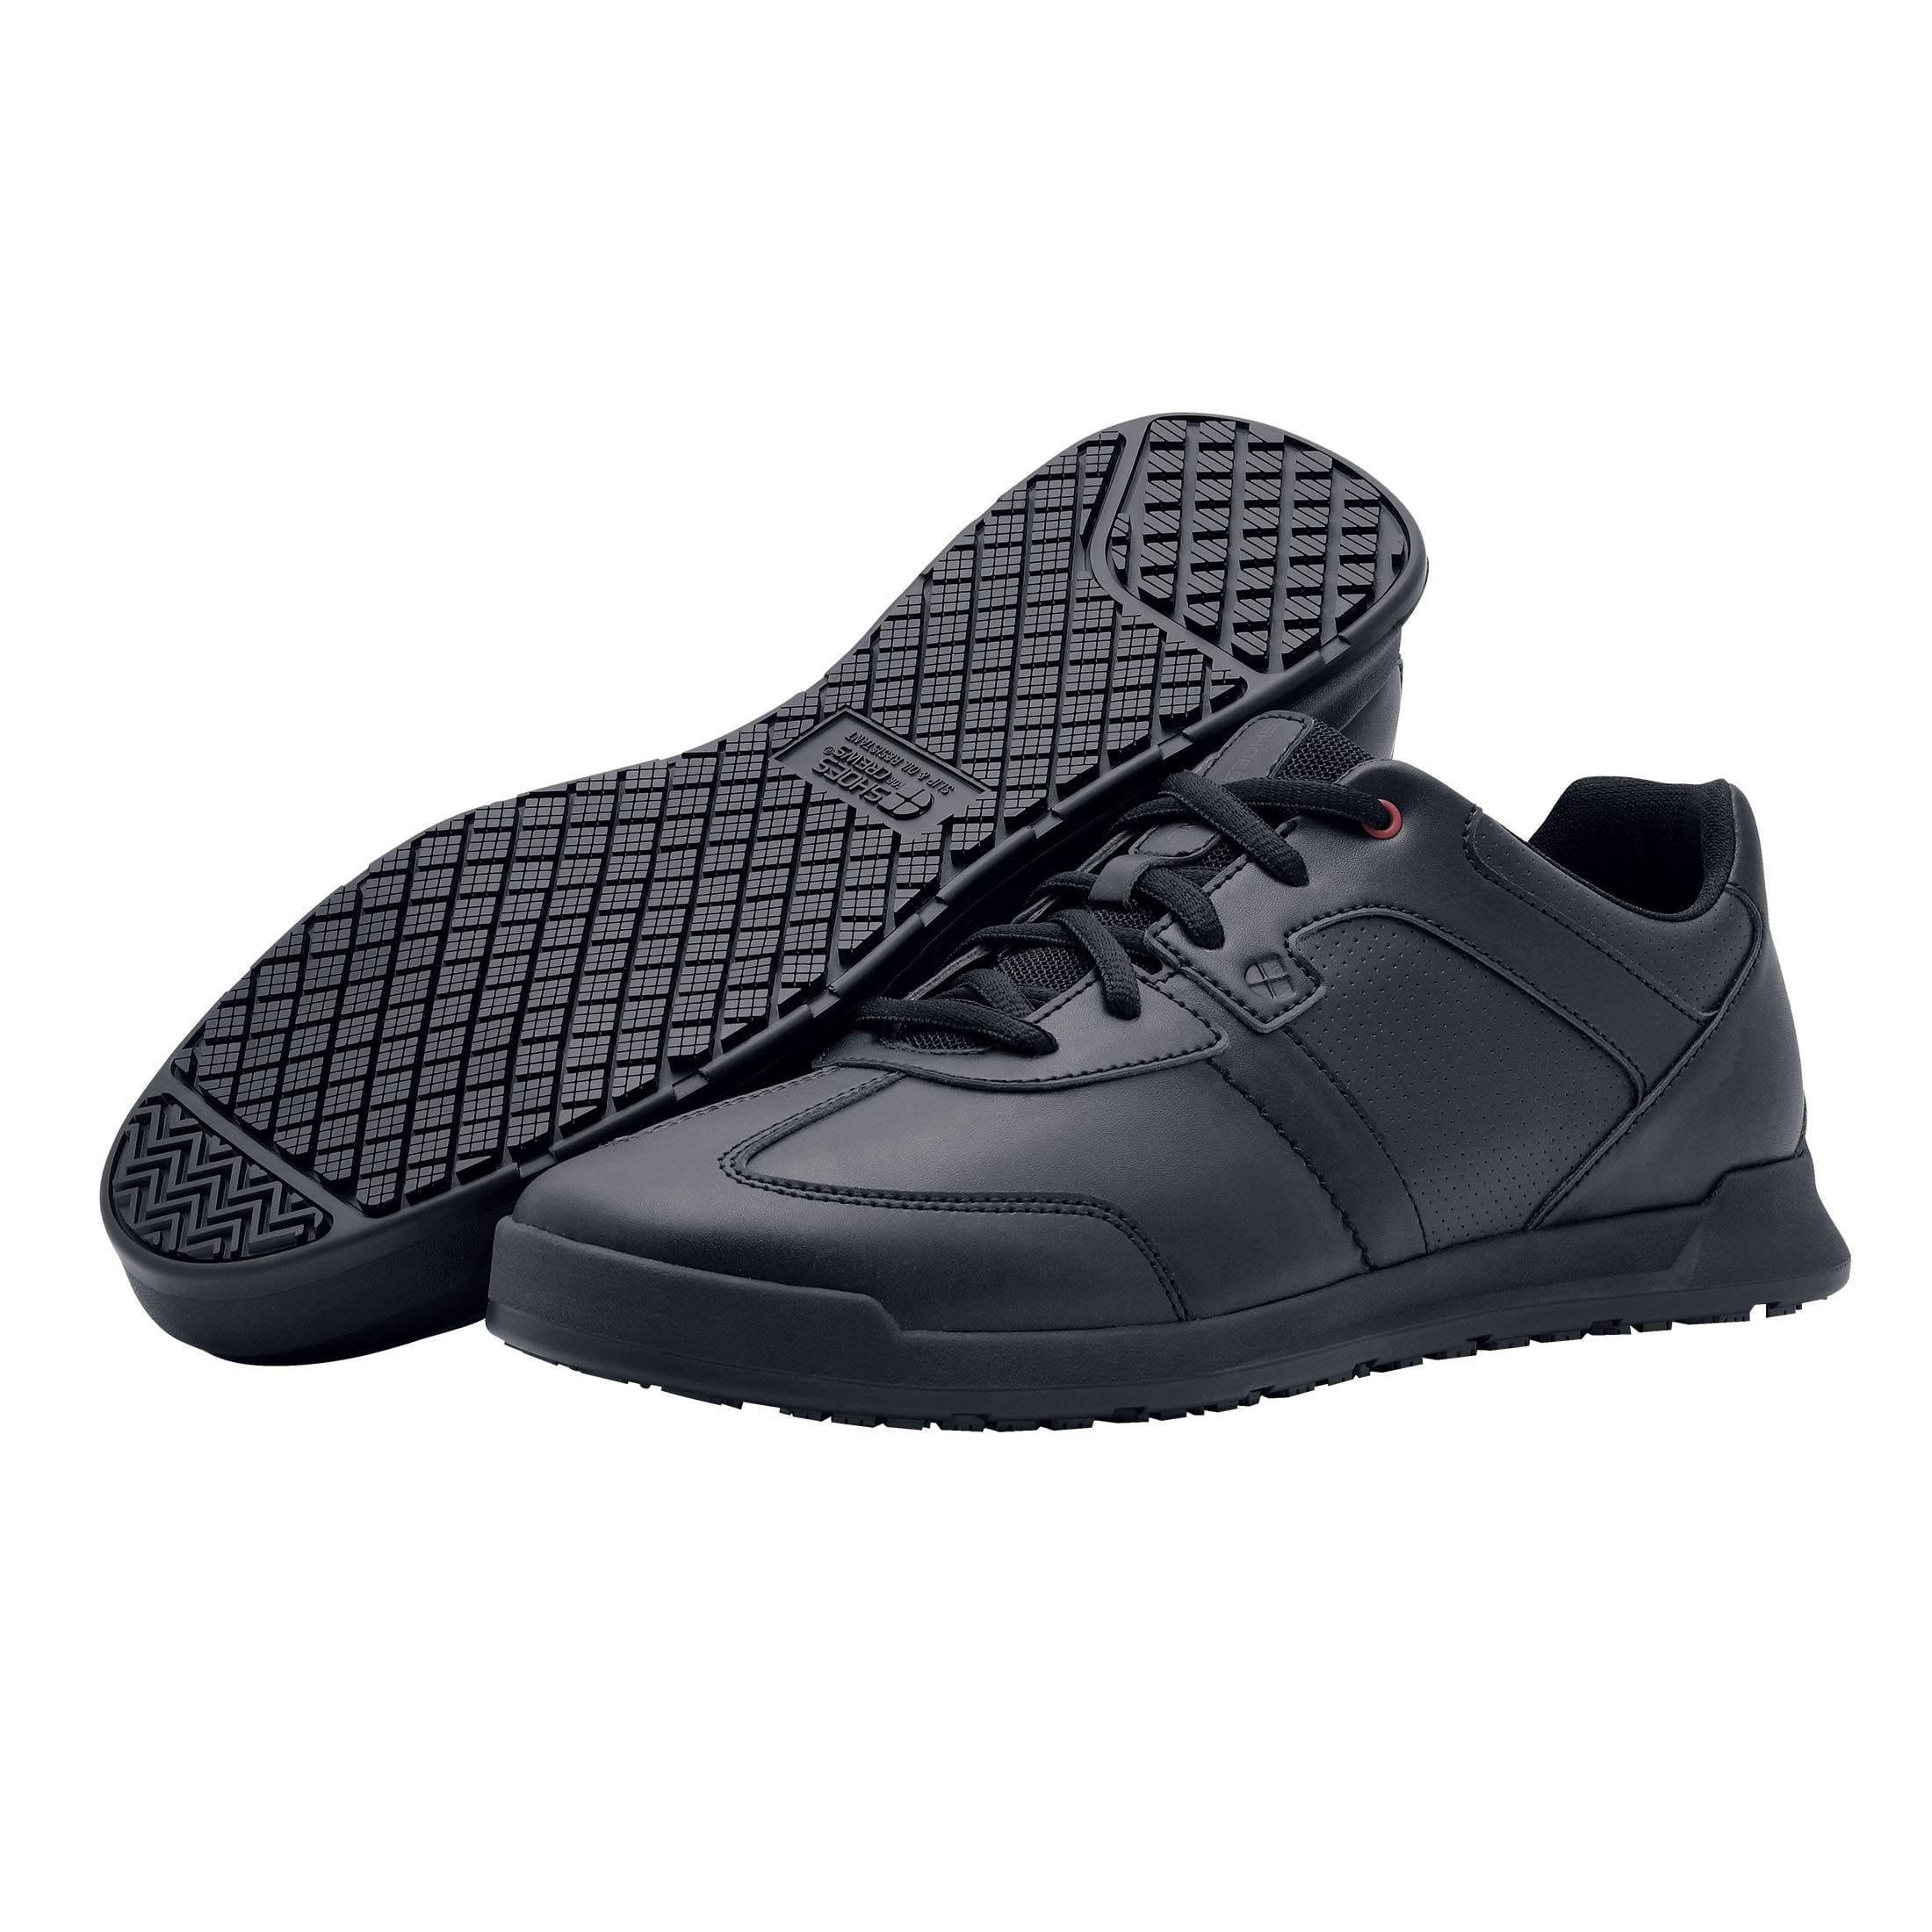 Water Resistant Shoes for Crews Unisex Slip On in Black Nubuck Leather 